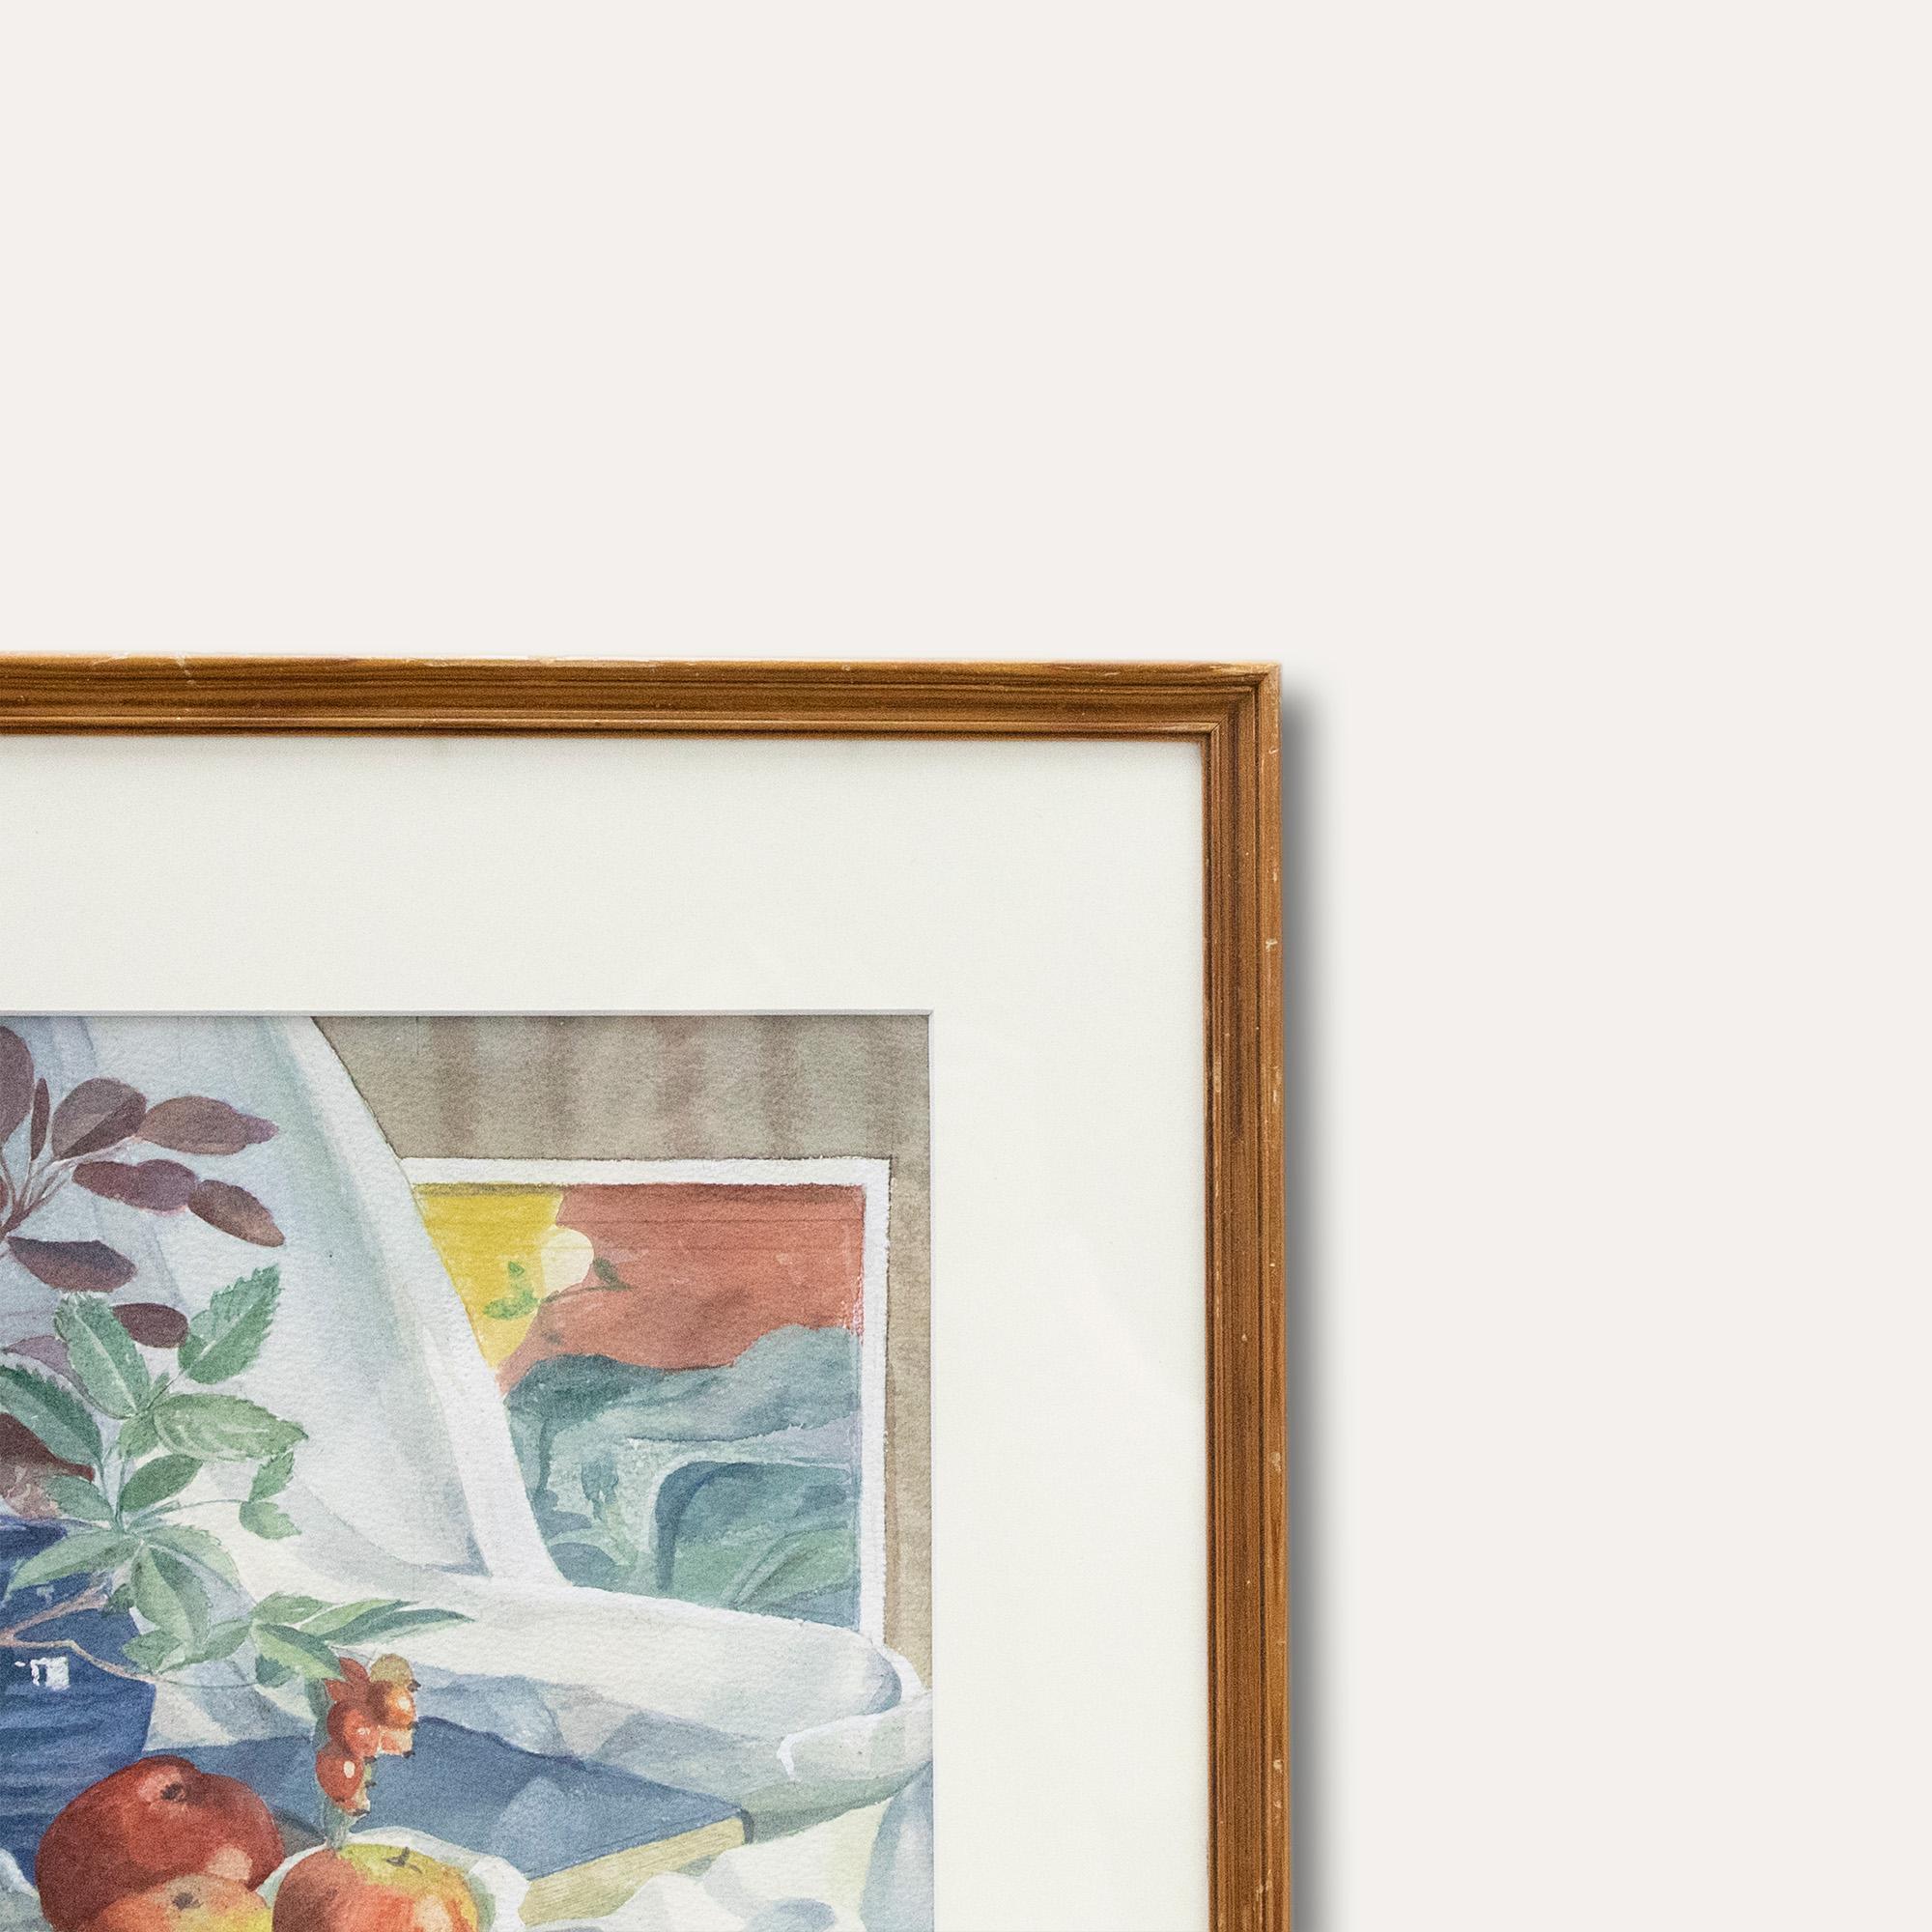 A charming watercolour study depicting apples, books and plants placed on a white cloth to make a delightful still life composition. Signed in graphite to the lower right. Presented in a light wooden frame. On paper.